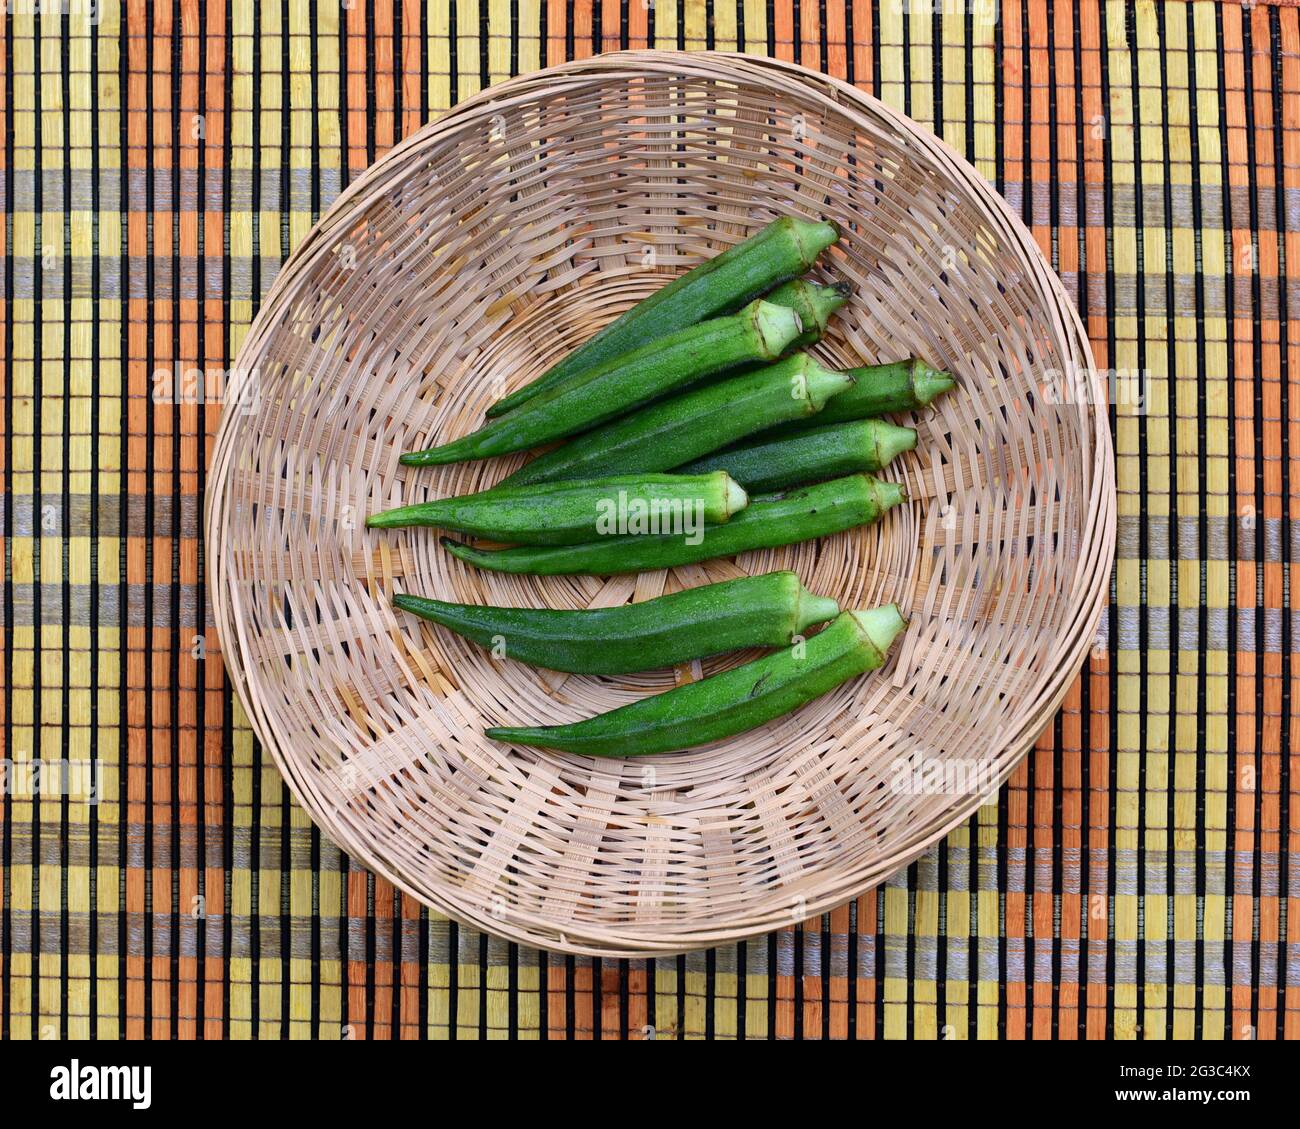 green okra pods in a a small basket on a coloured straw mat Stock Photo